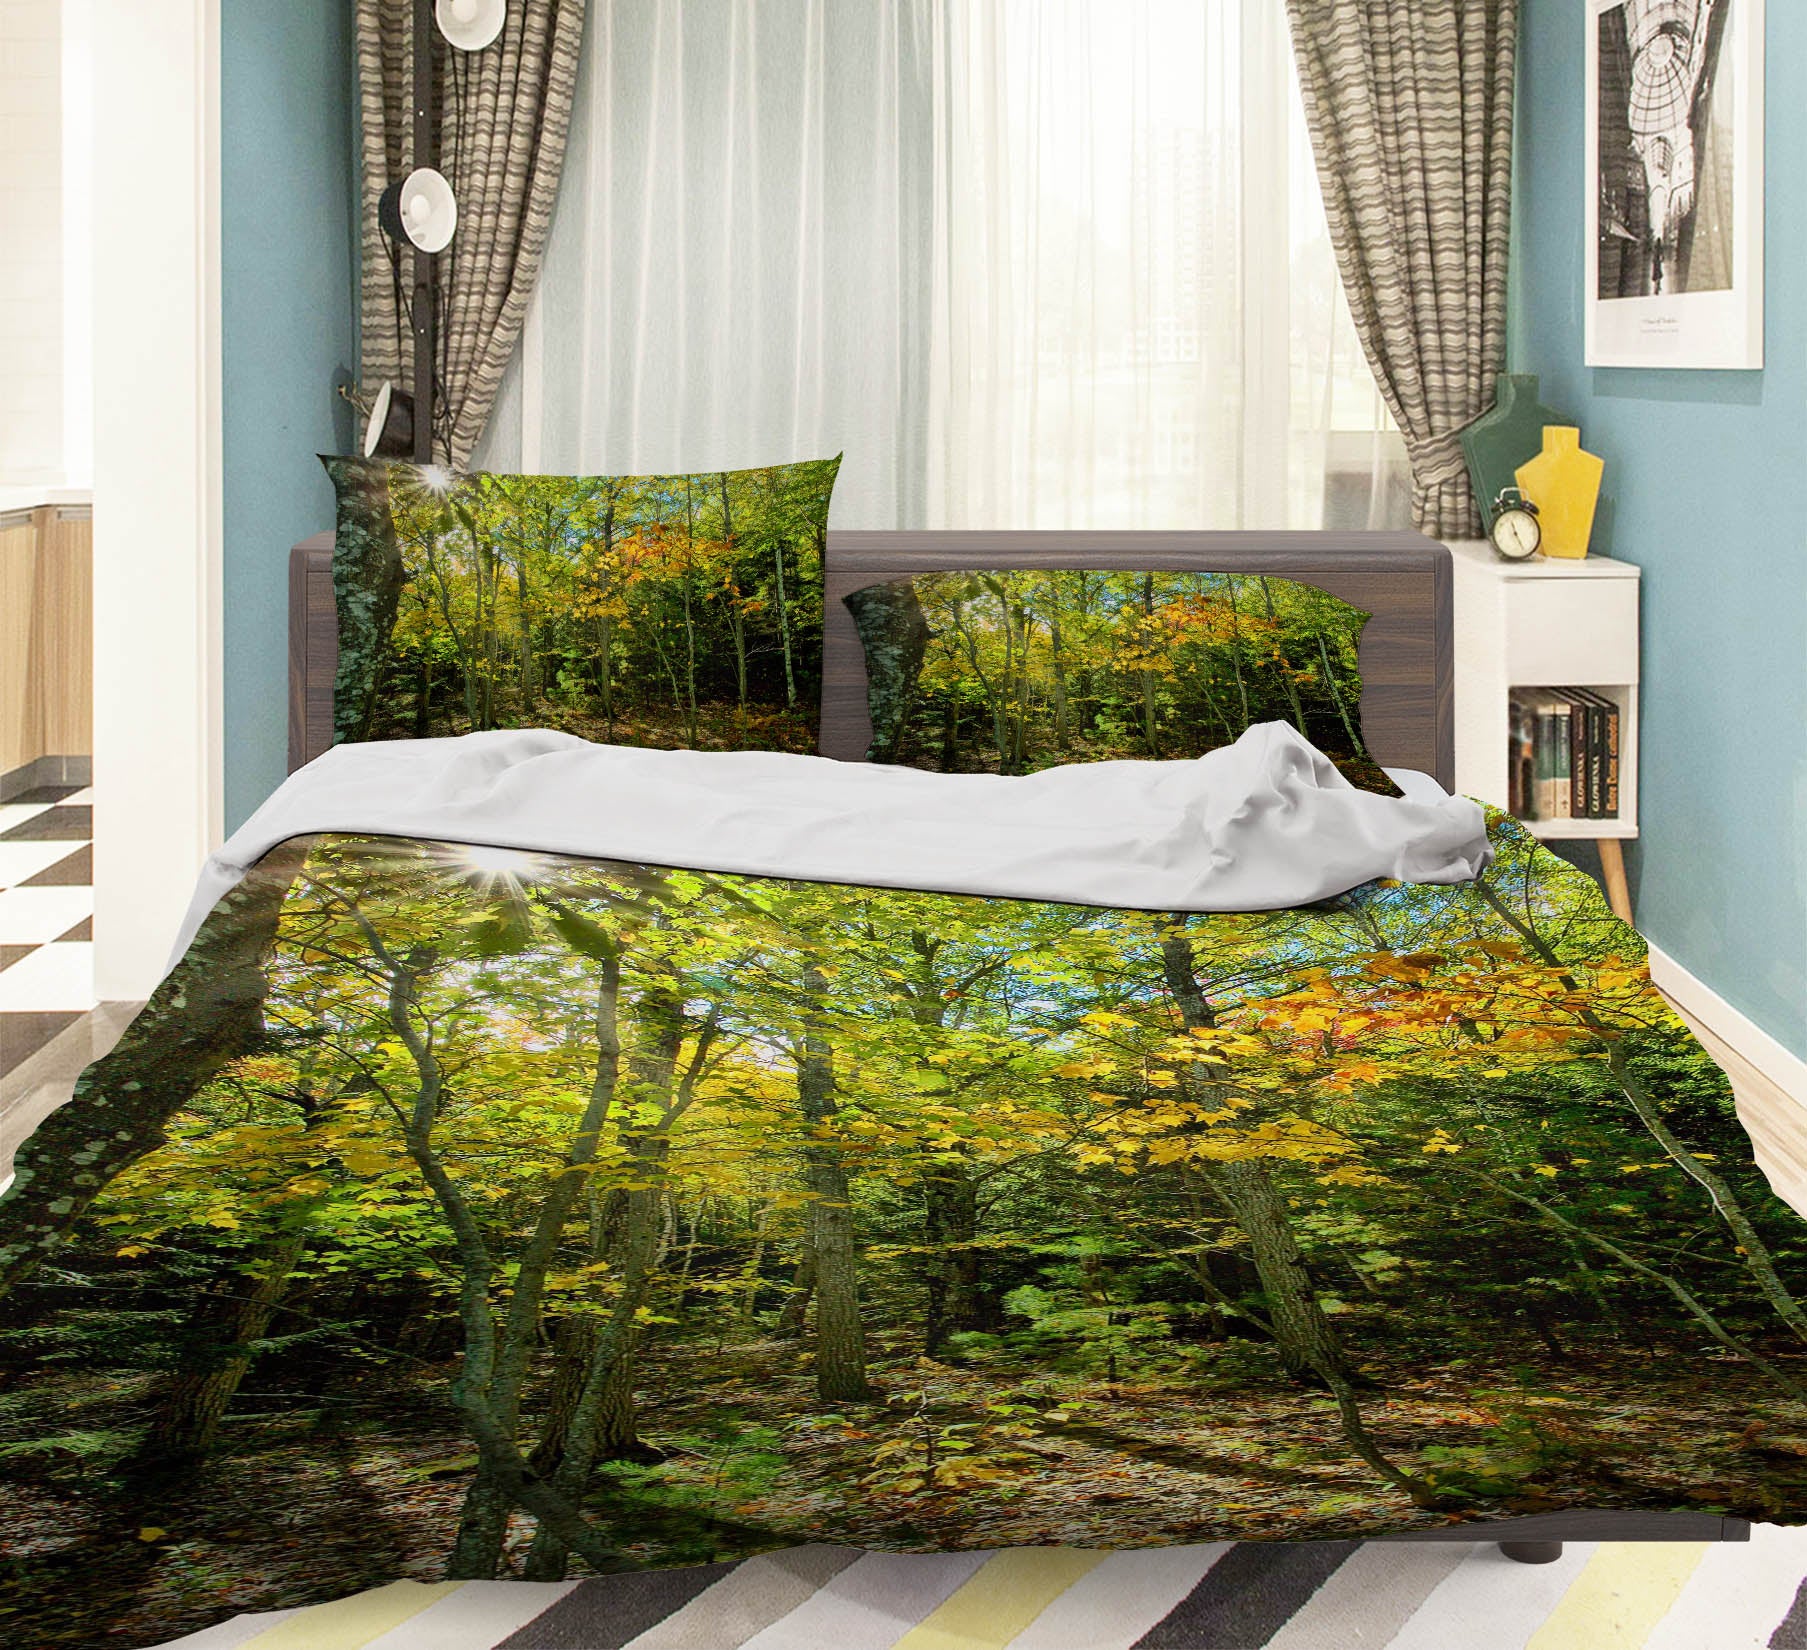 3D Forest 62174 Kathy Barefield Bedding Bed Pillowcases Quilt